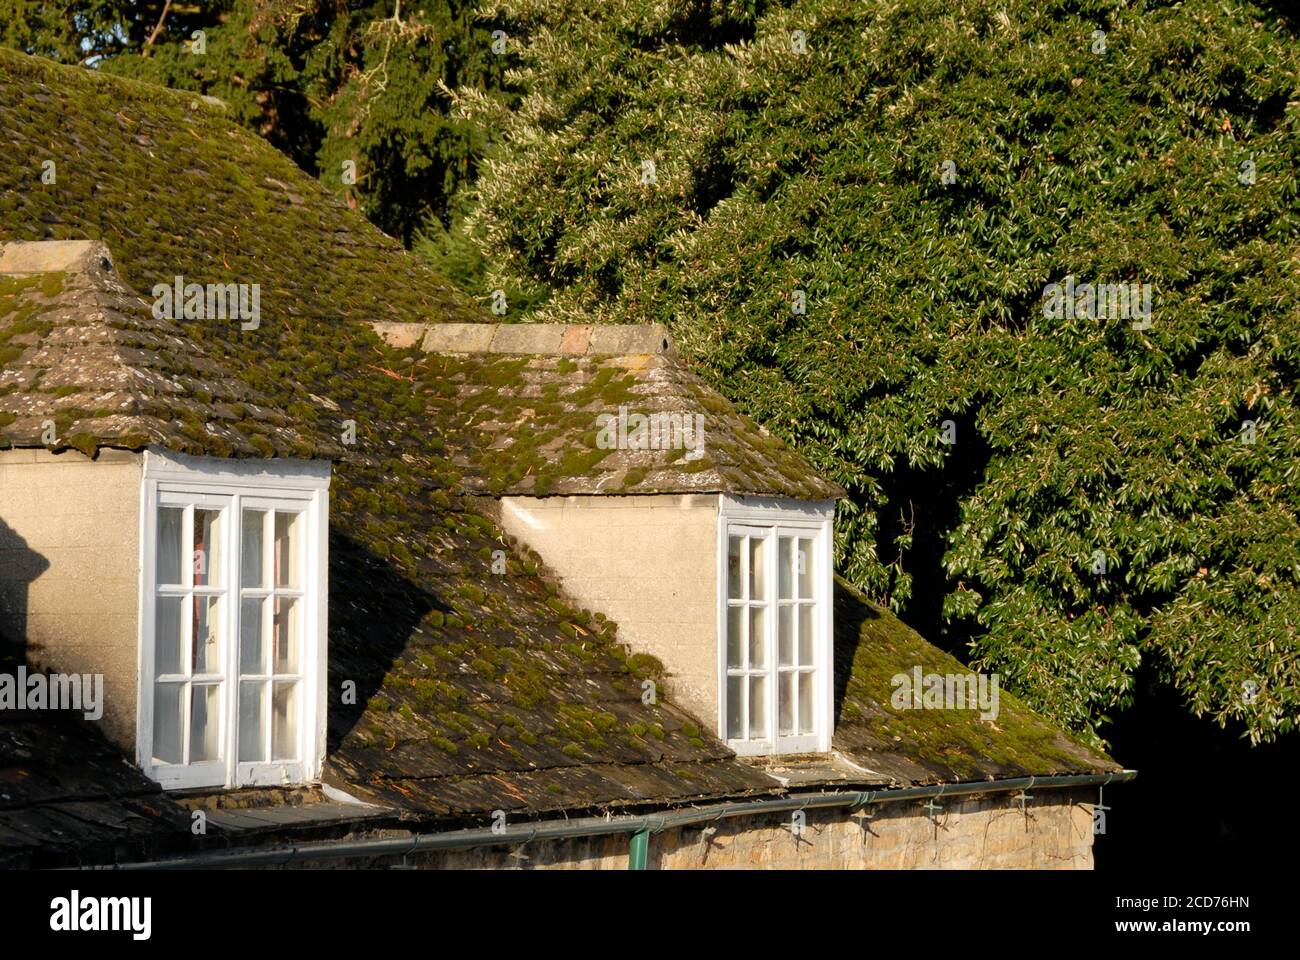 Two dormer windows in a moss-covered tiled roof, Cambridgeshire, England Stock Photo